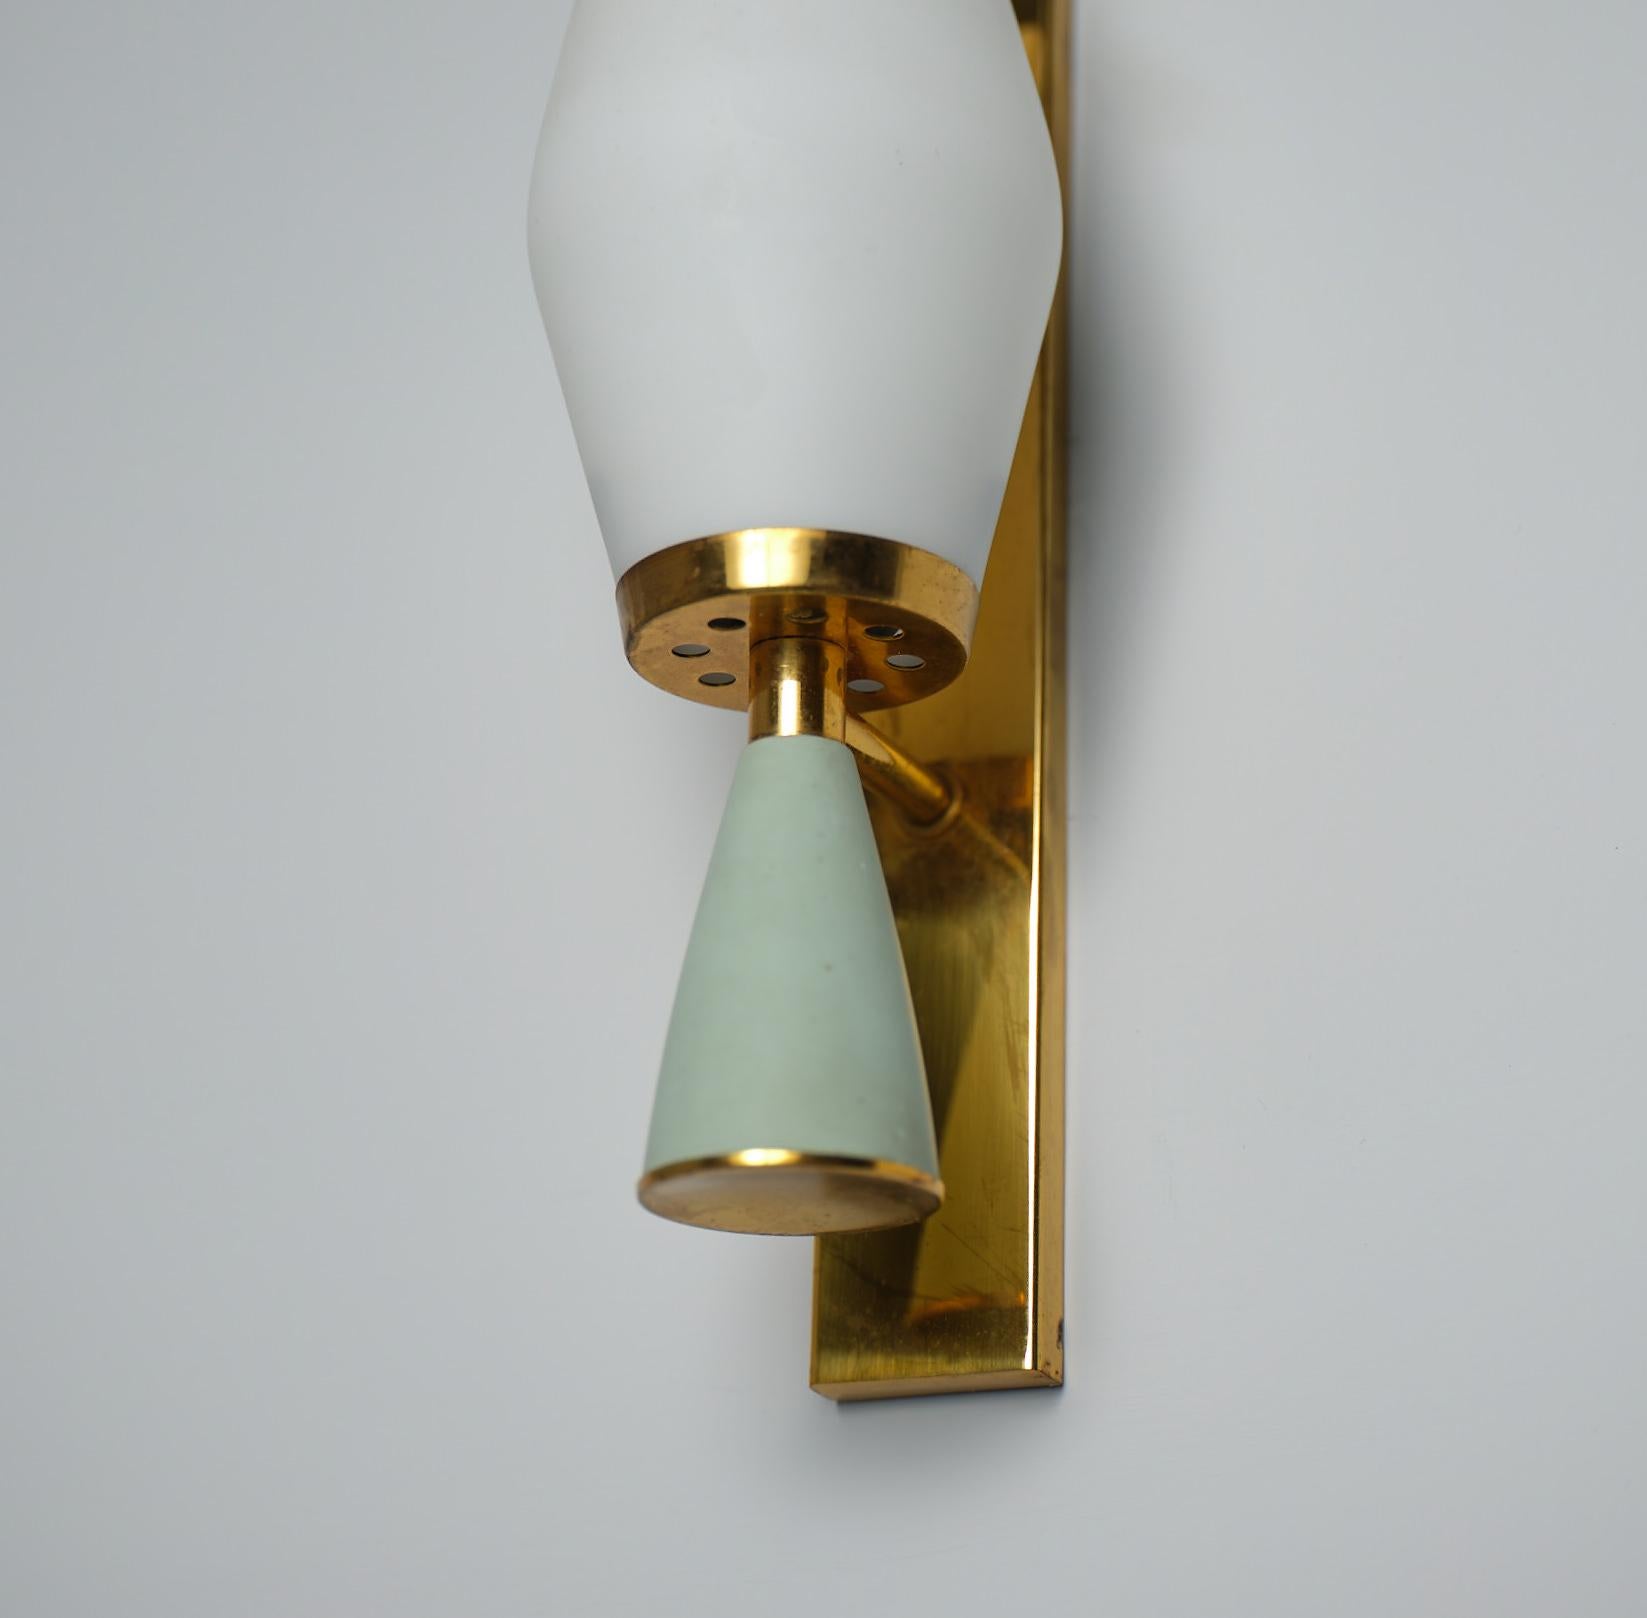 Pair of  vintage Italian Appliques , crafted in Italy during the 1950s, these sconces embody the refined style of the era. Made of brass with captivating sage green metal accents and opaline glass shades, each wall lamp exudes sophistication. While